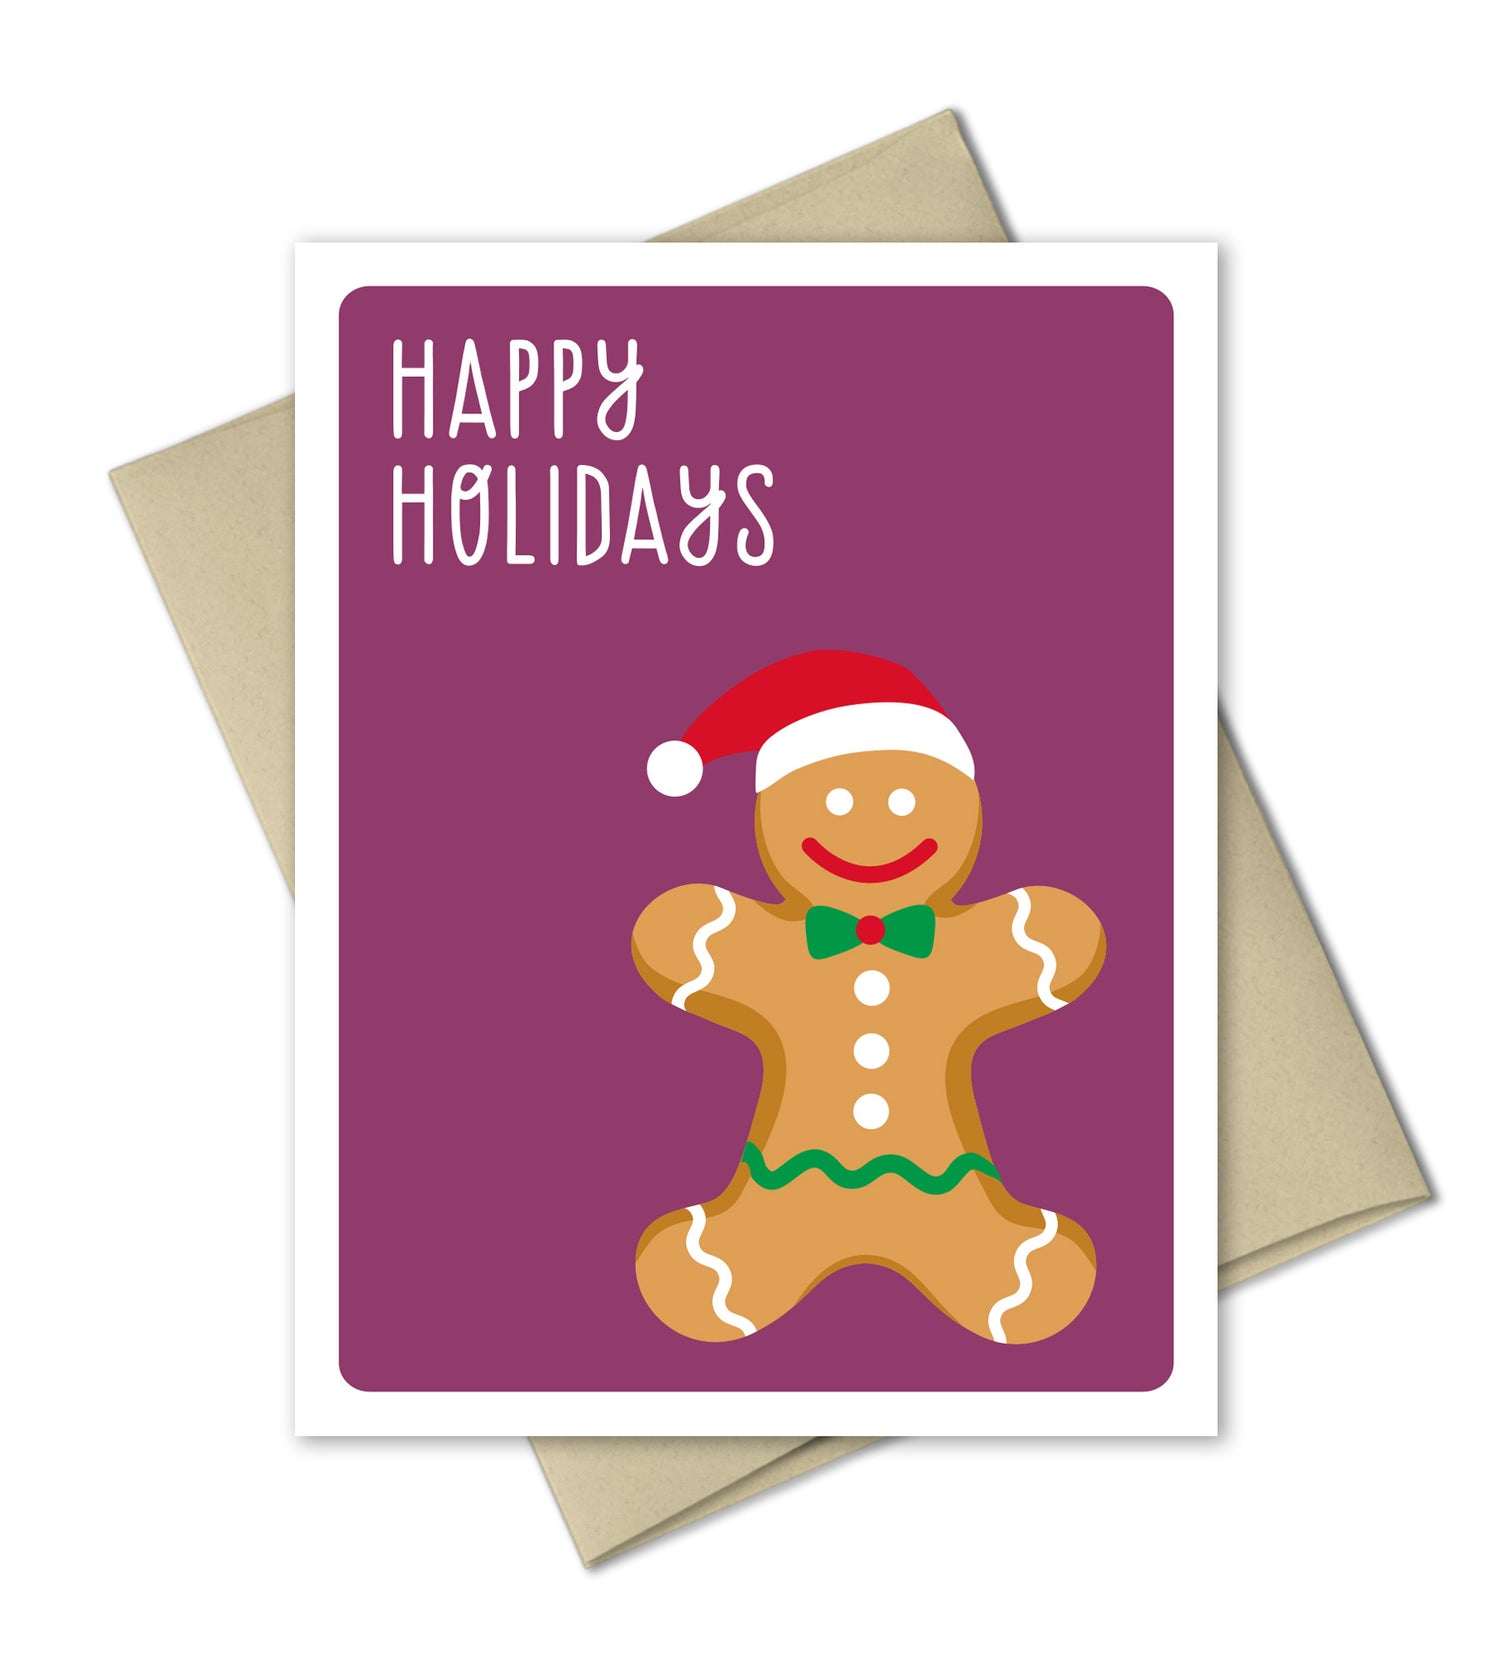 Cute Holiday Card - Gingerbread Boy - The Imagination Spot